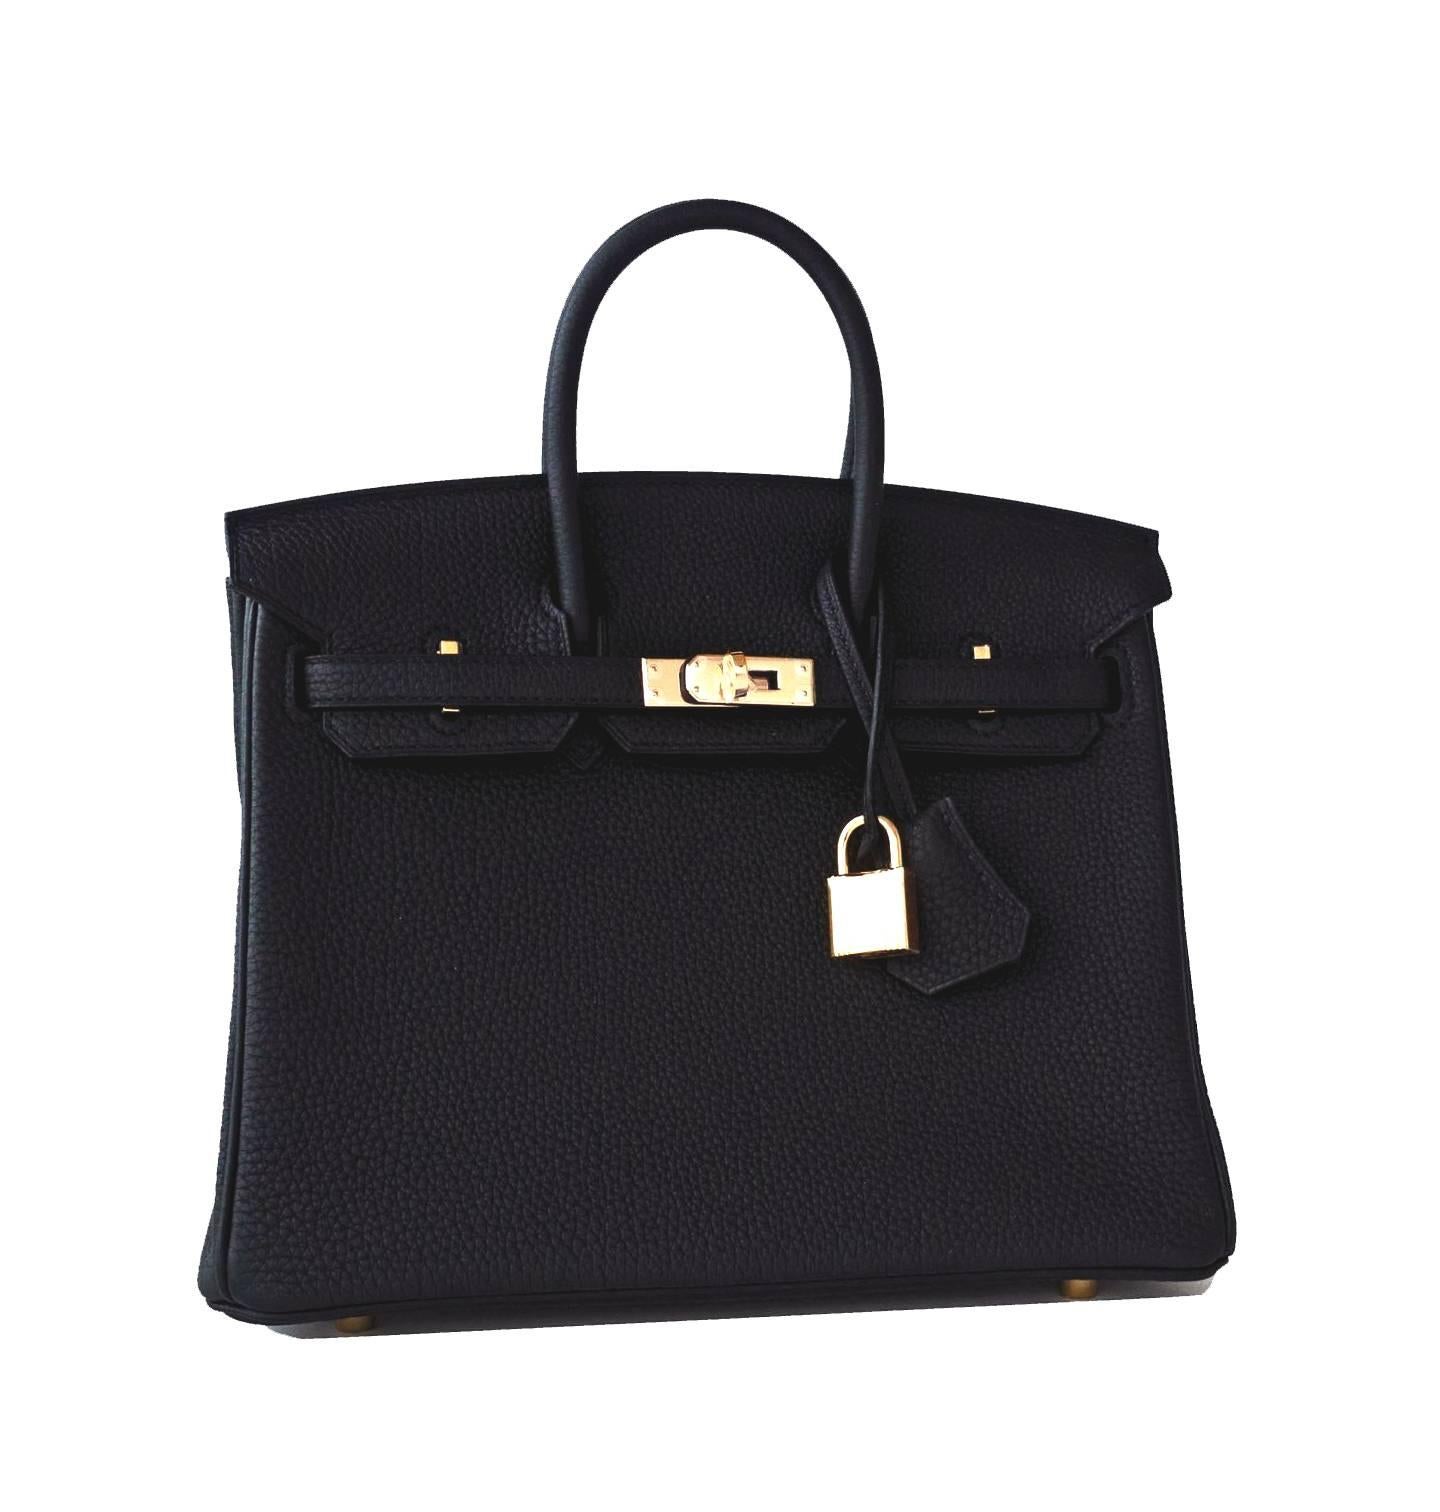 Hermes Black Baby Birkin 25cm Togo Gold GHW Satchel Jewel
Brand New in Box. Store Fresh. Pristine Condition (with plastic on hardware) 
Just purchased from Hermes store; bag bears interior X stamp.
Perfect gift! Comes full set with keys, lock,